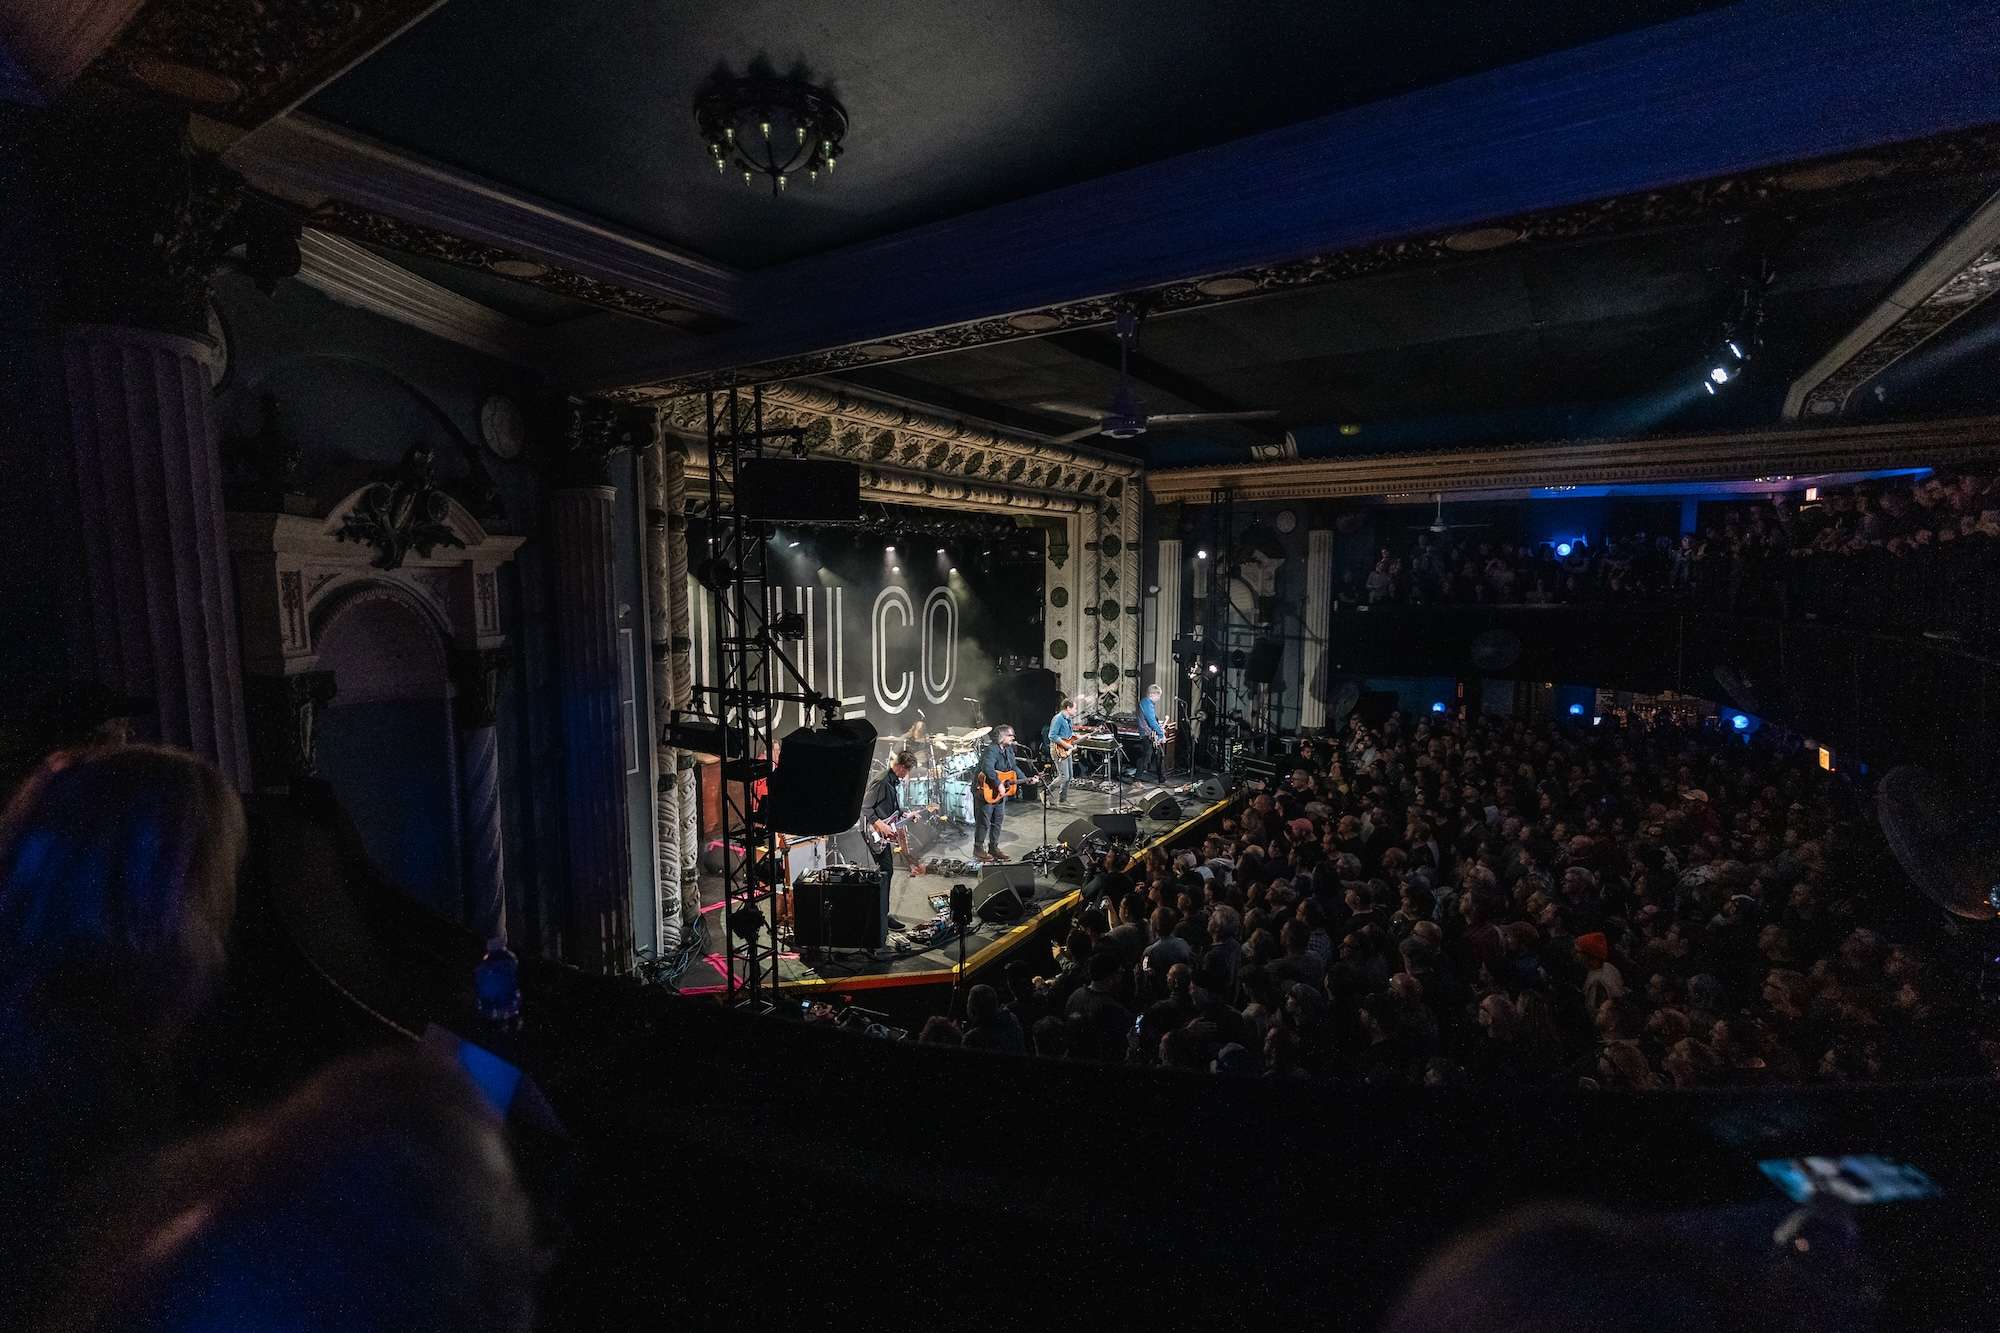 Wilco Live at Metro [GALLERY] 15